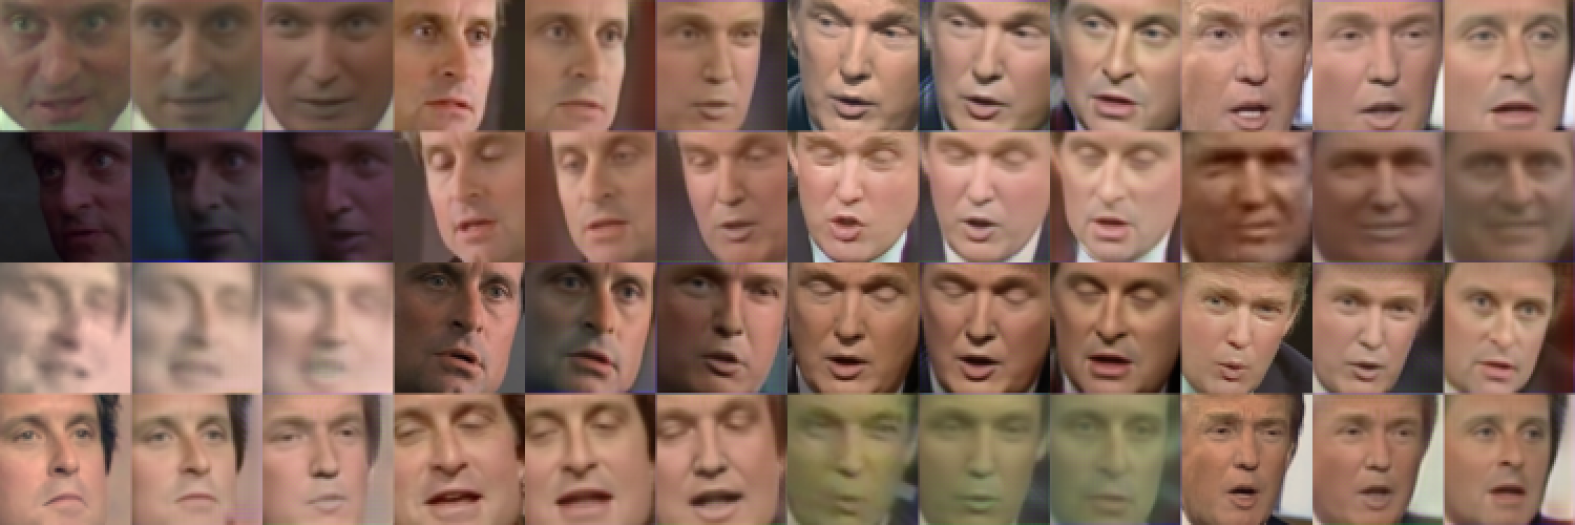 so_many_faces.png